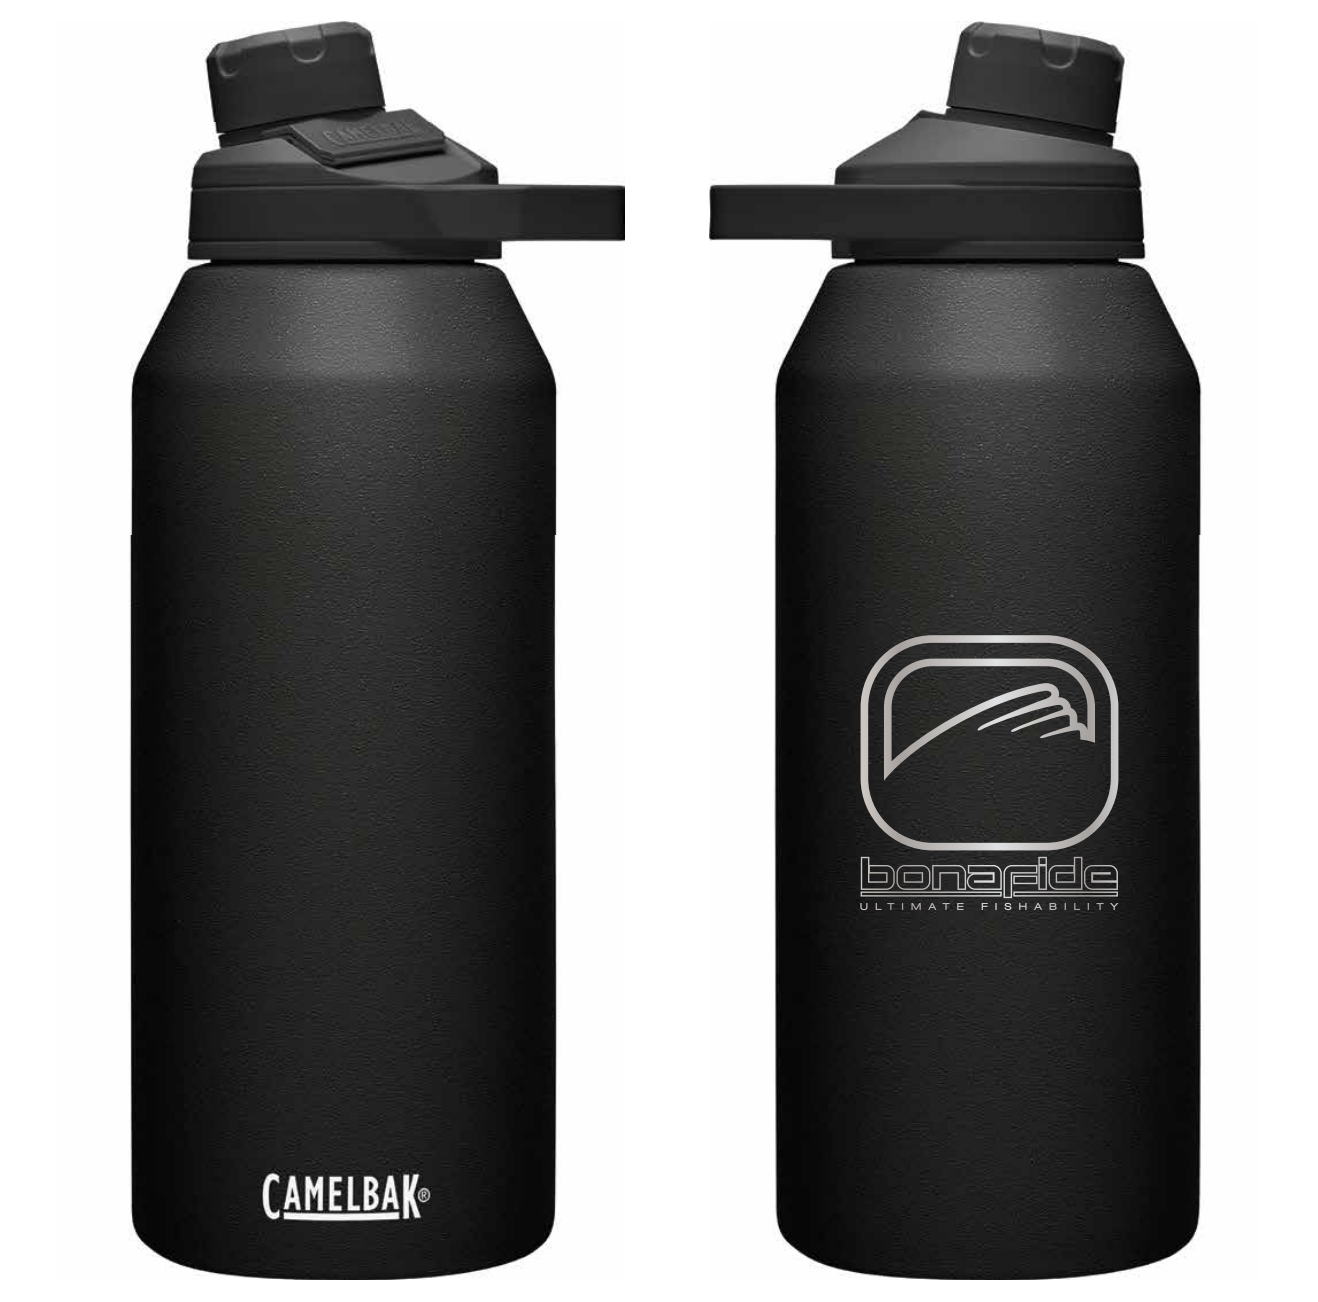 New CamelBak Chute Mag Vacuum Insulated Stainless Steel Water